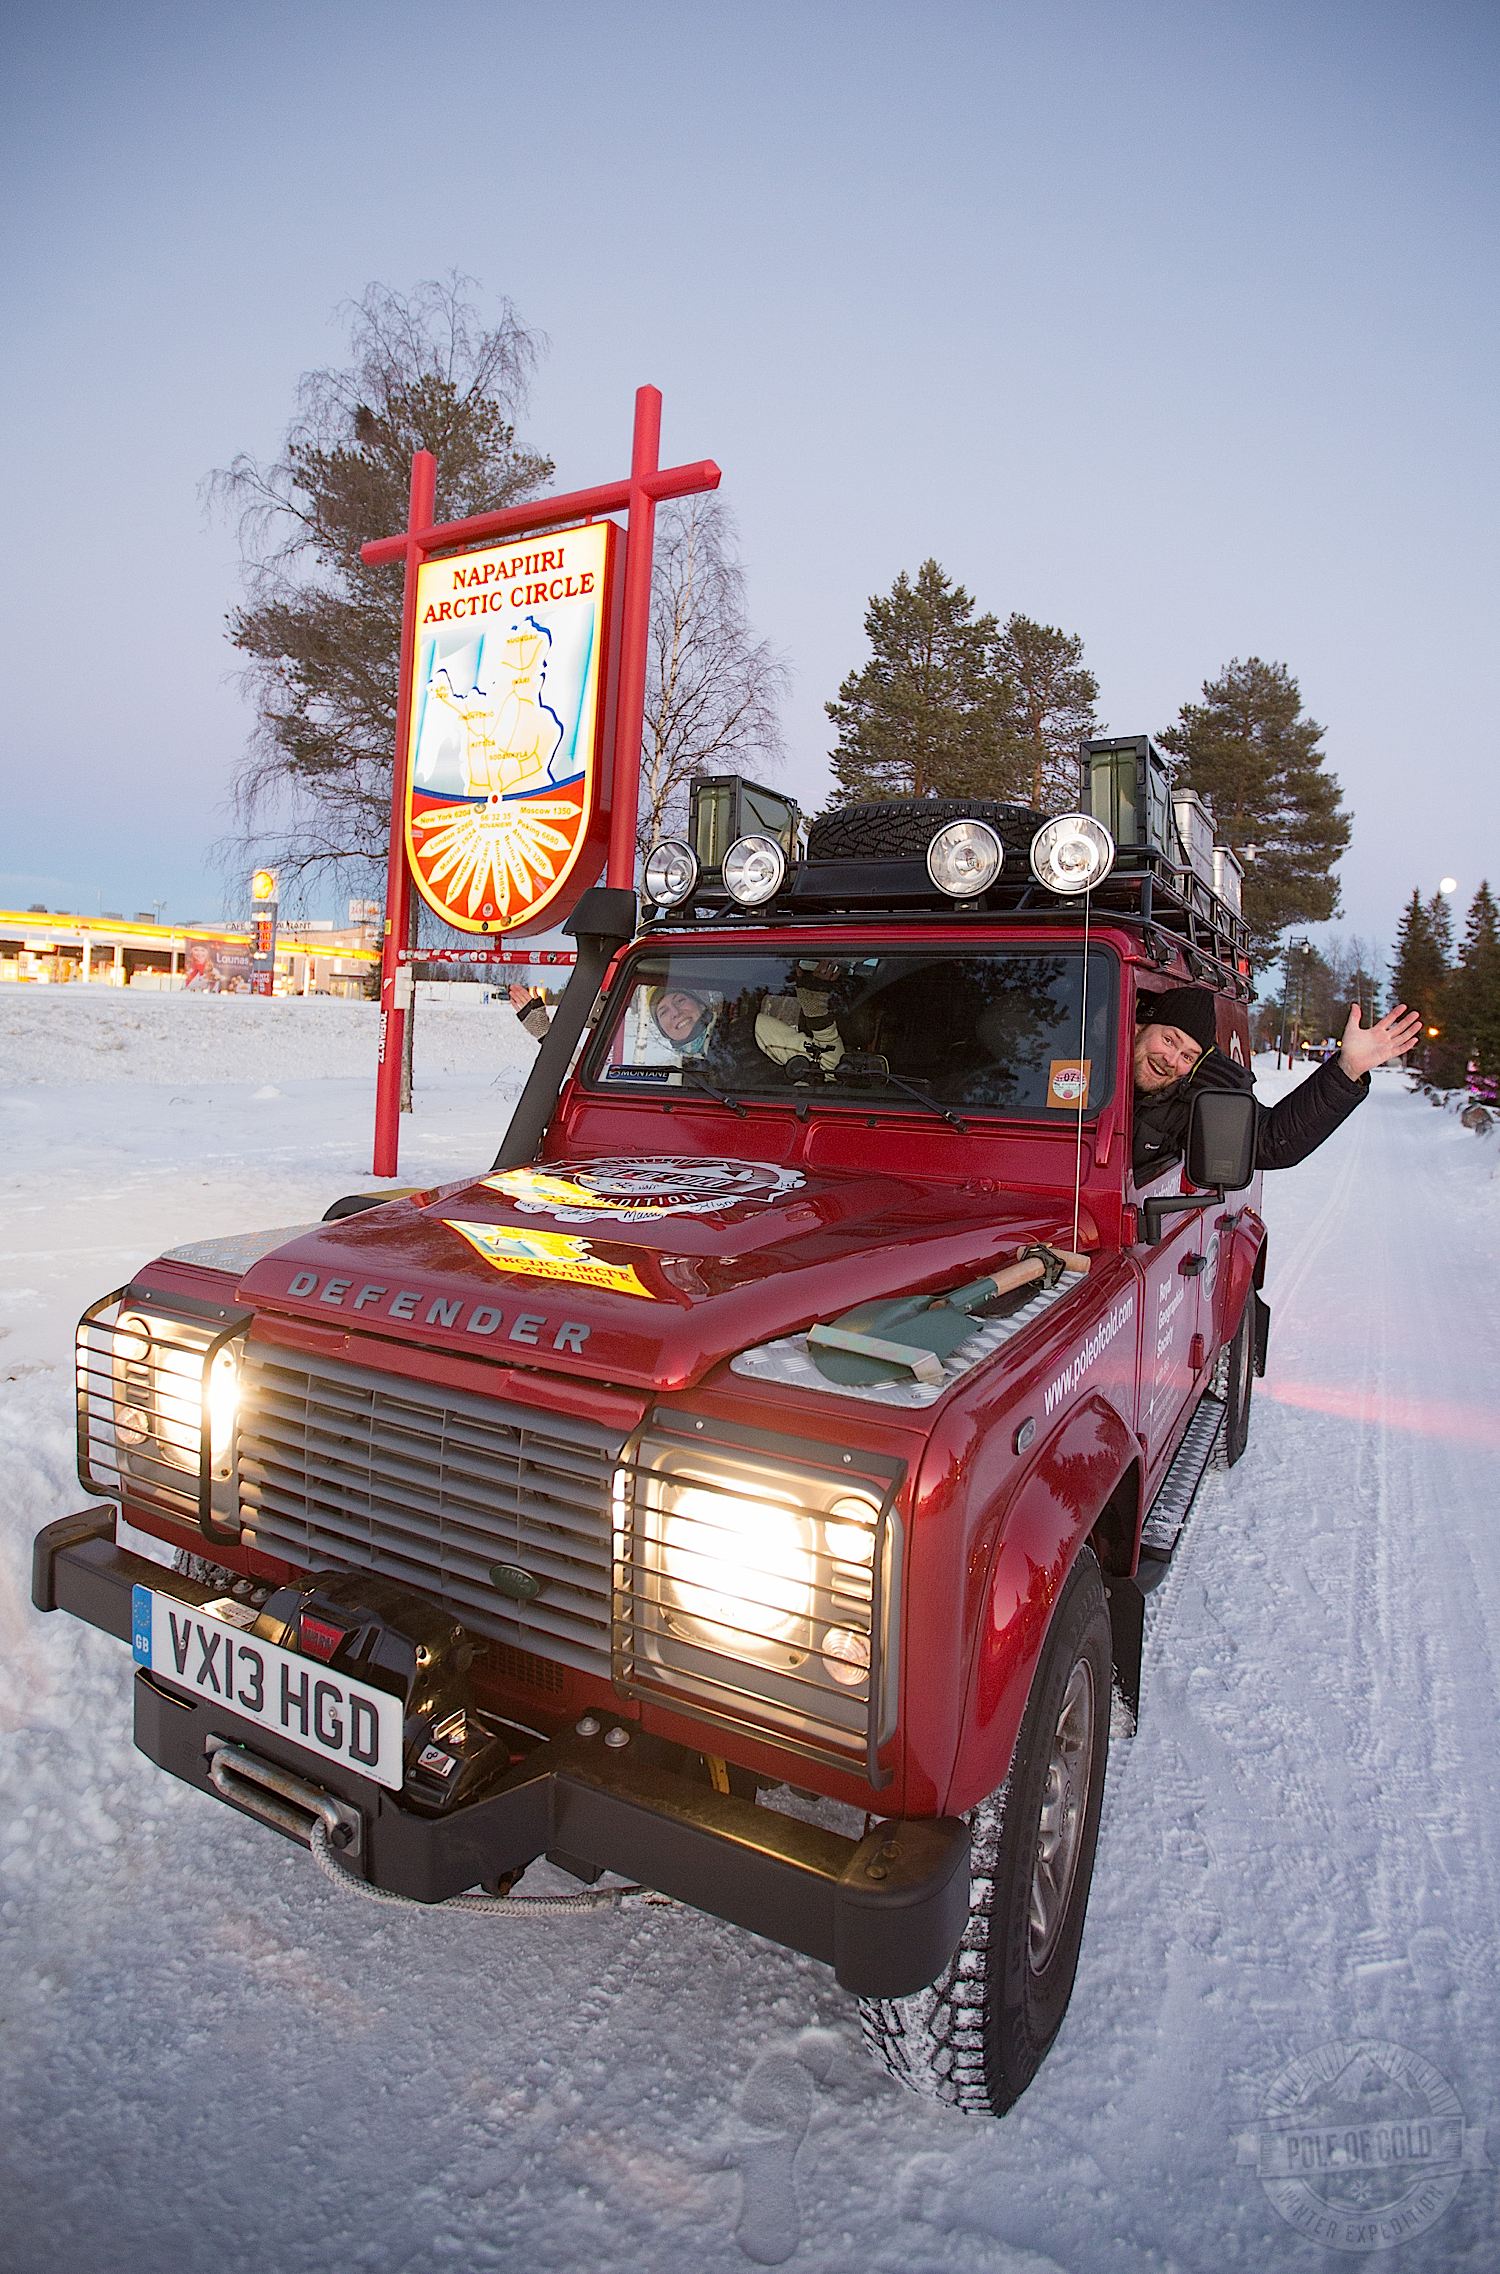 The Pole of Cold Land Rover Expedition